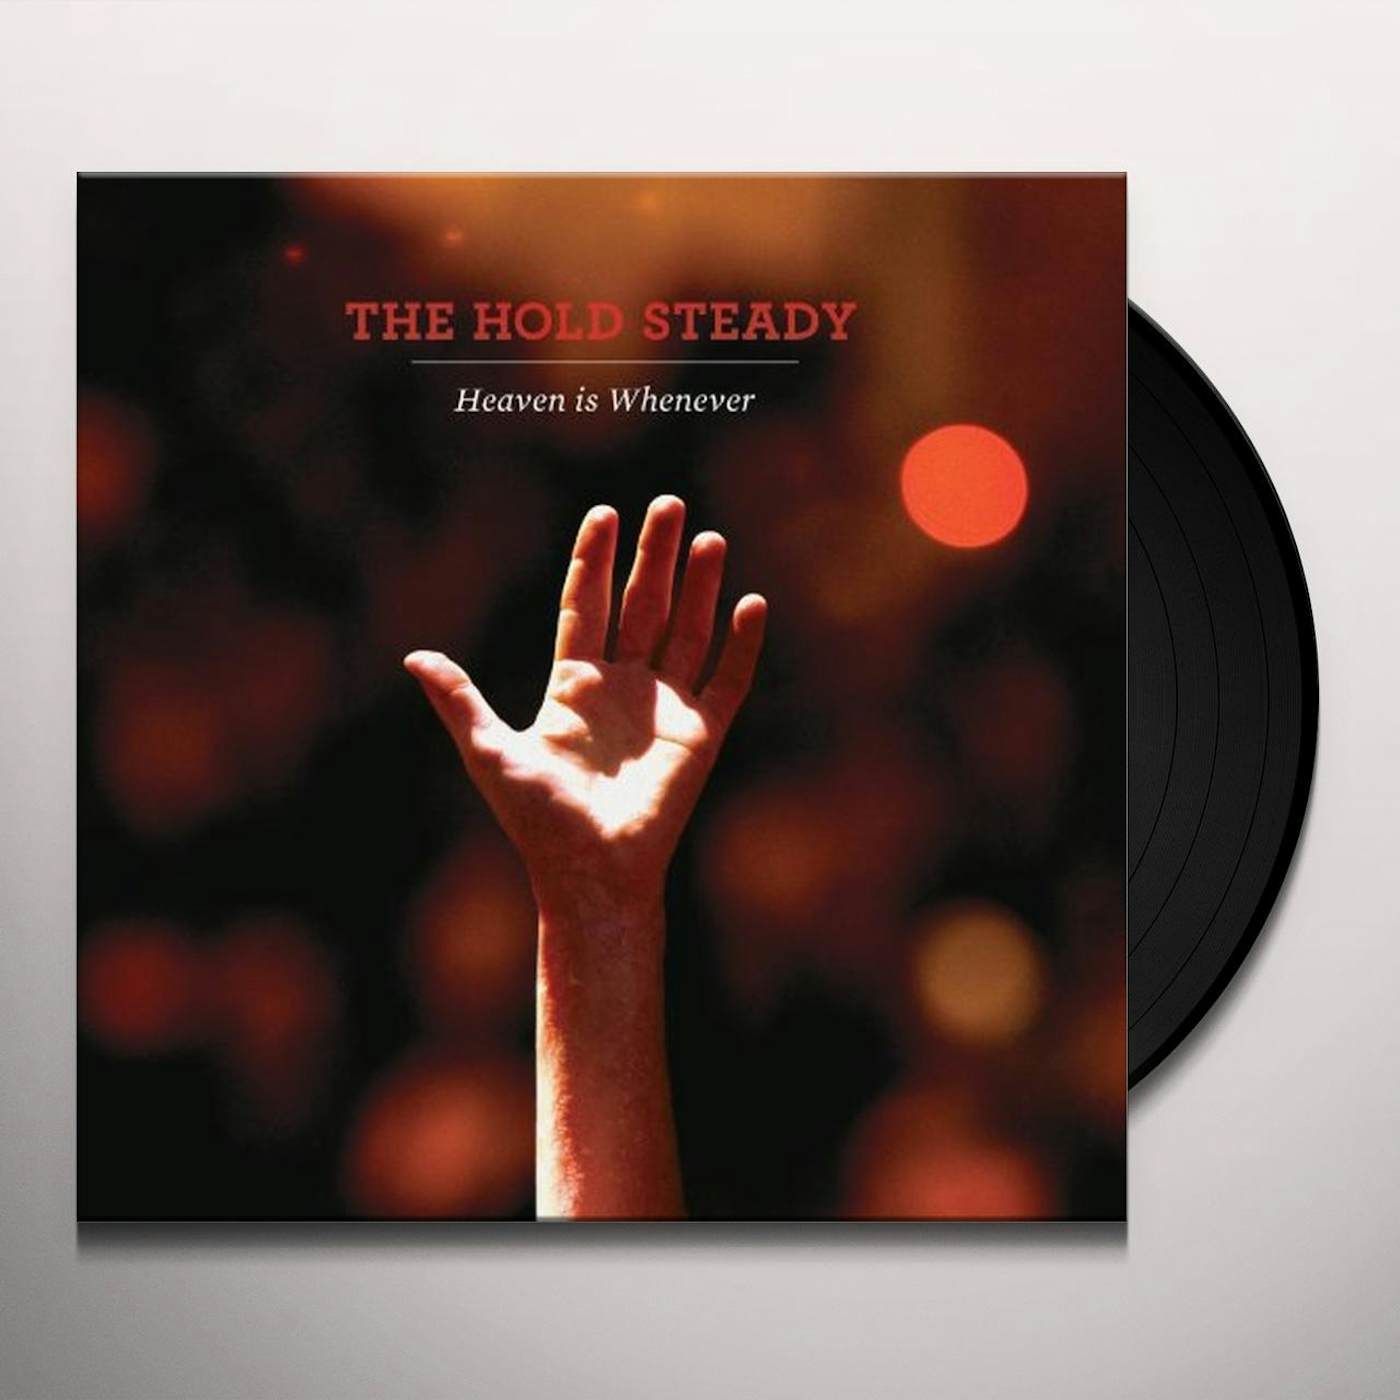 The Hold Steady HEAVEN IS WHENEVER (Vinyl)